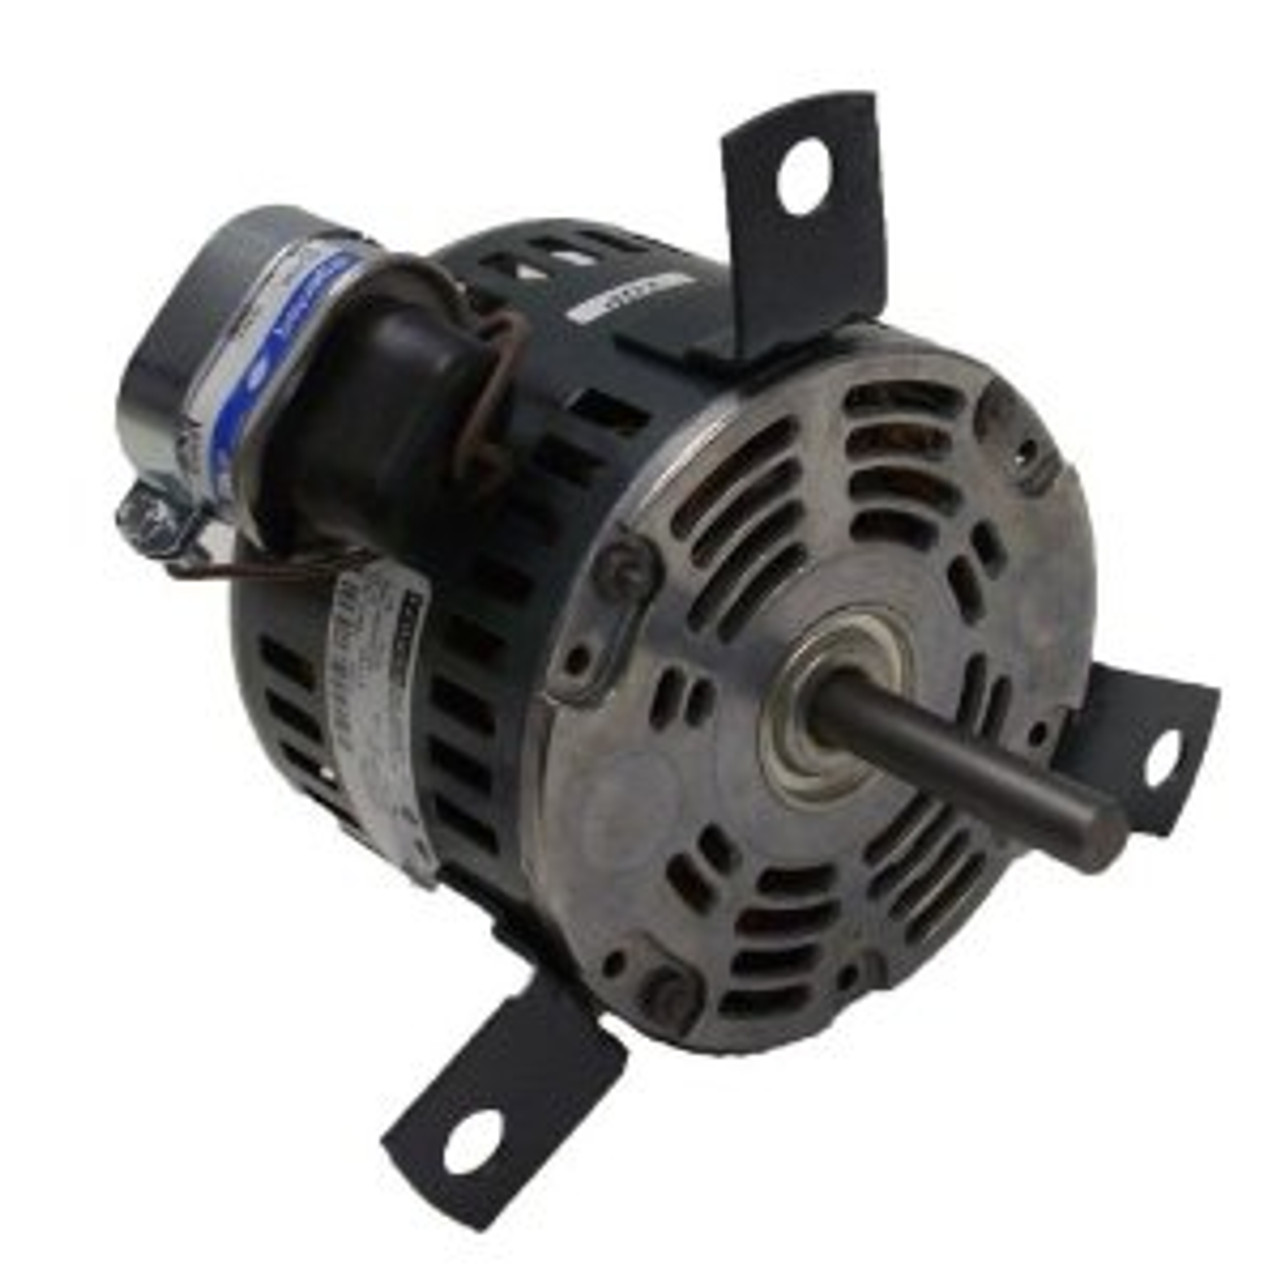 63747-0 Penn Vent Electric Motor (7185-0264) 1/6 hp, 3-Speed, 115 Volts